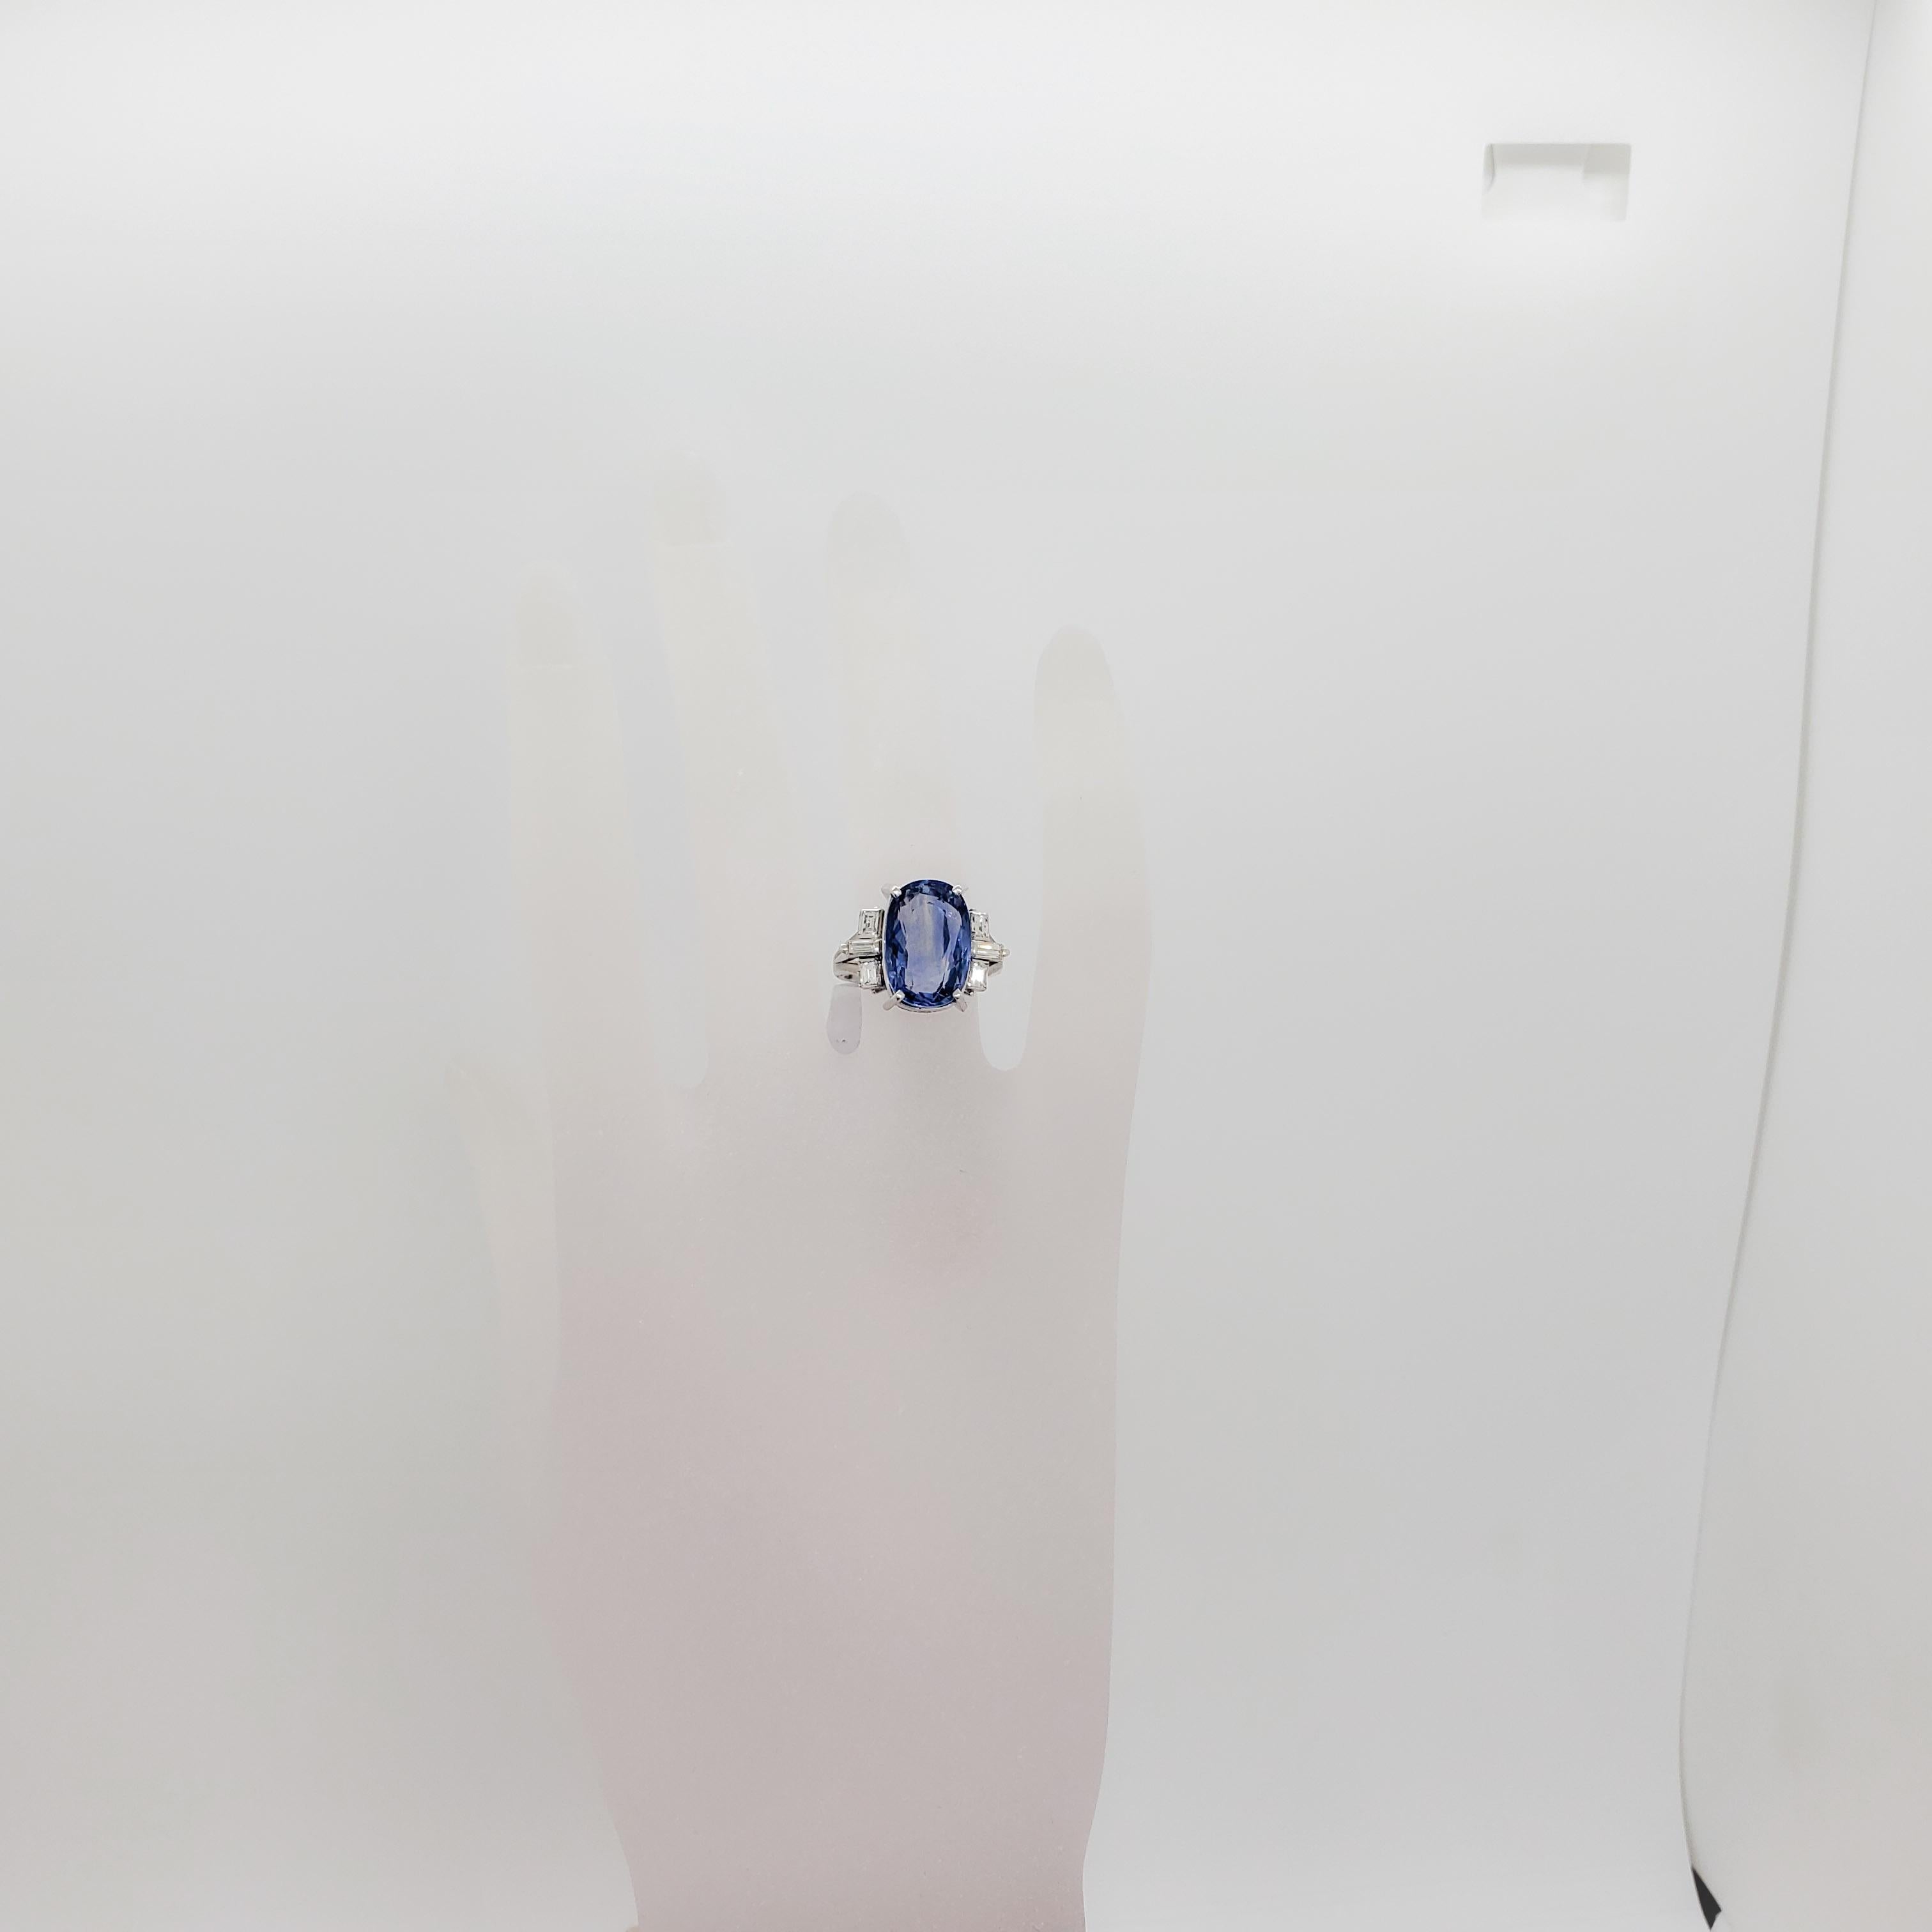 Gorgeous 8.05 ct. Sri Lanka blue Ceylon sapphire oval with 0.52 ct. good quality white diamond emerald cuts in a platinum handmade mounting. Ring size 6.25. Sapphire is unheated. GIA cert.